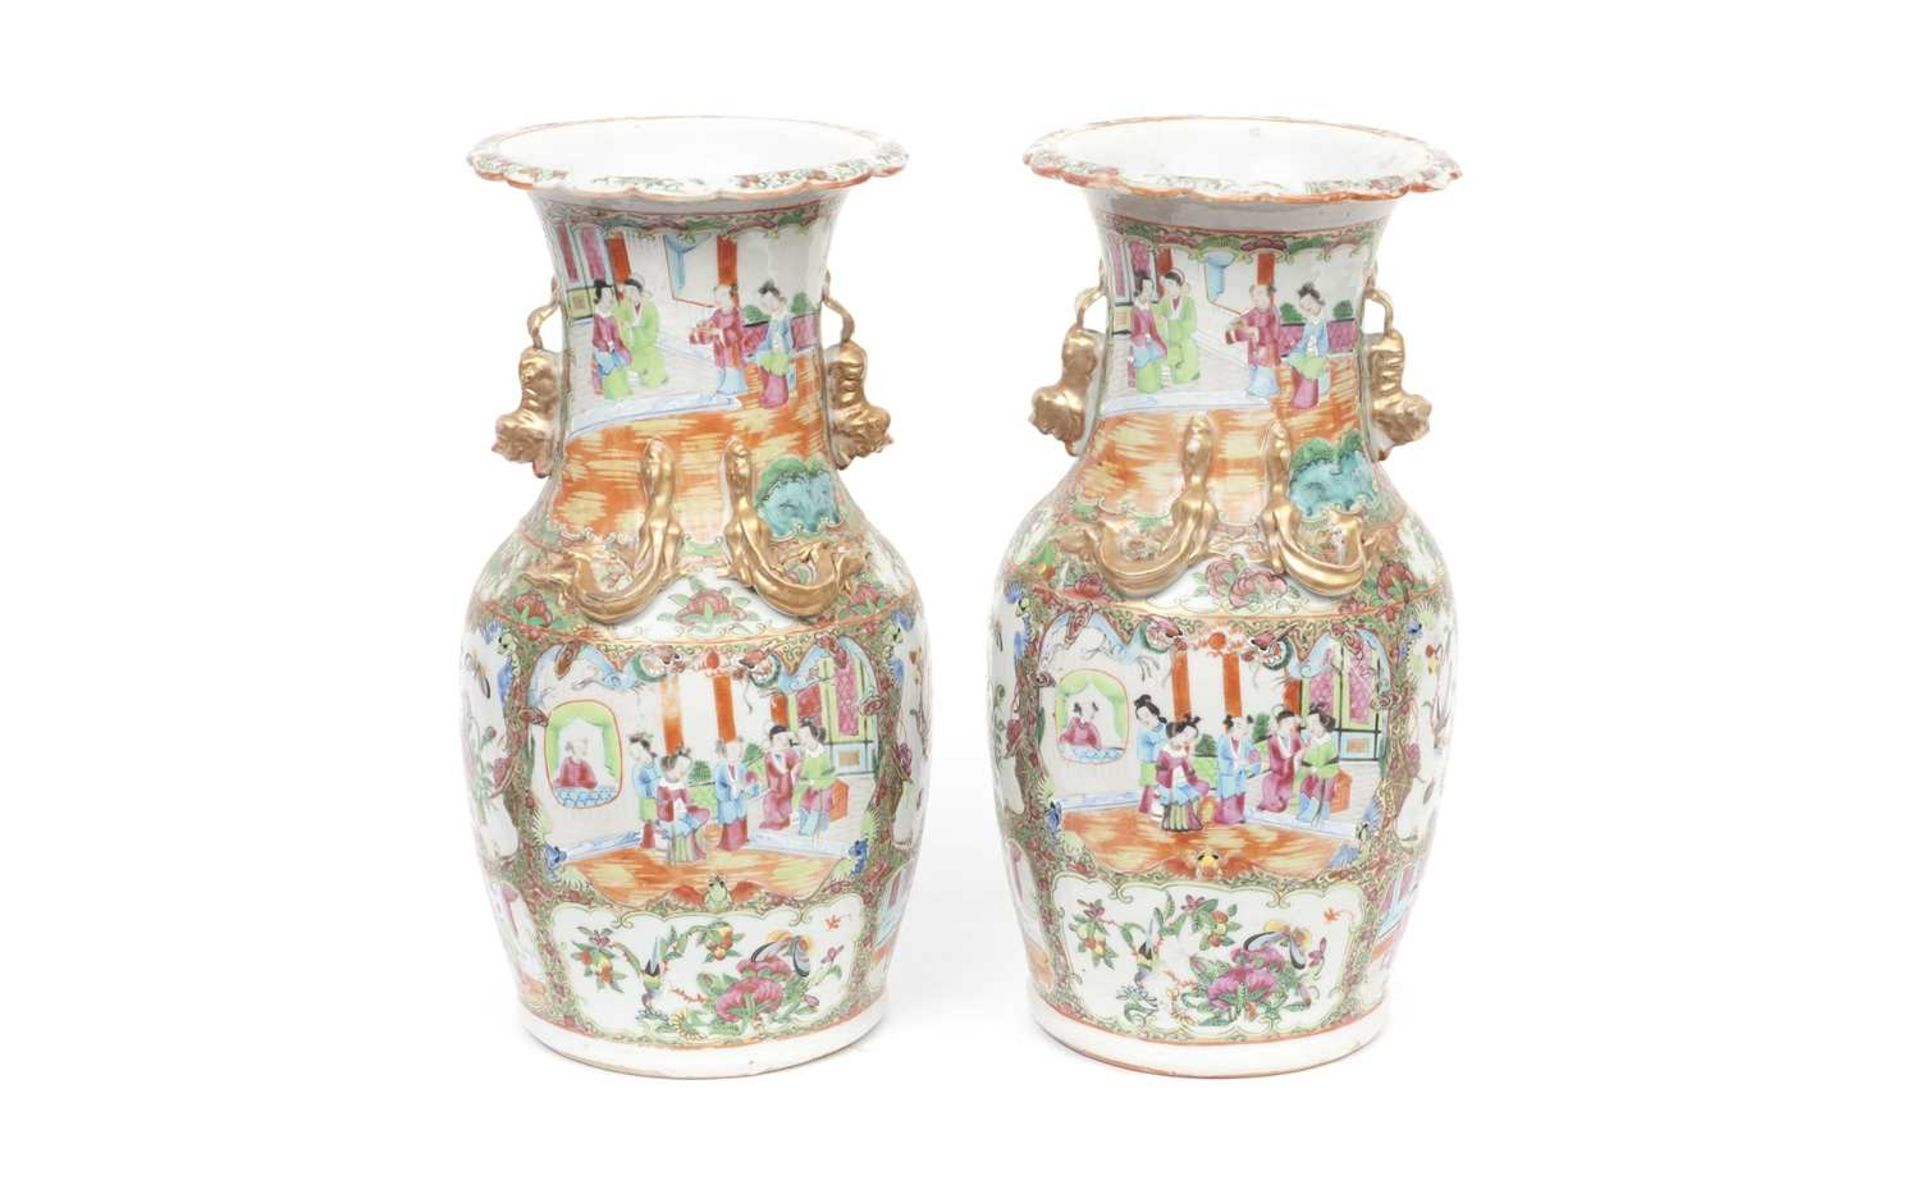 A PAIR OF LATE 19TH CENTURY CHINESE CANTON PORCELAIN VASES - Image 2 of 3